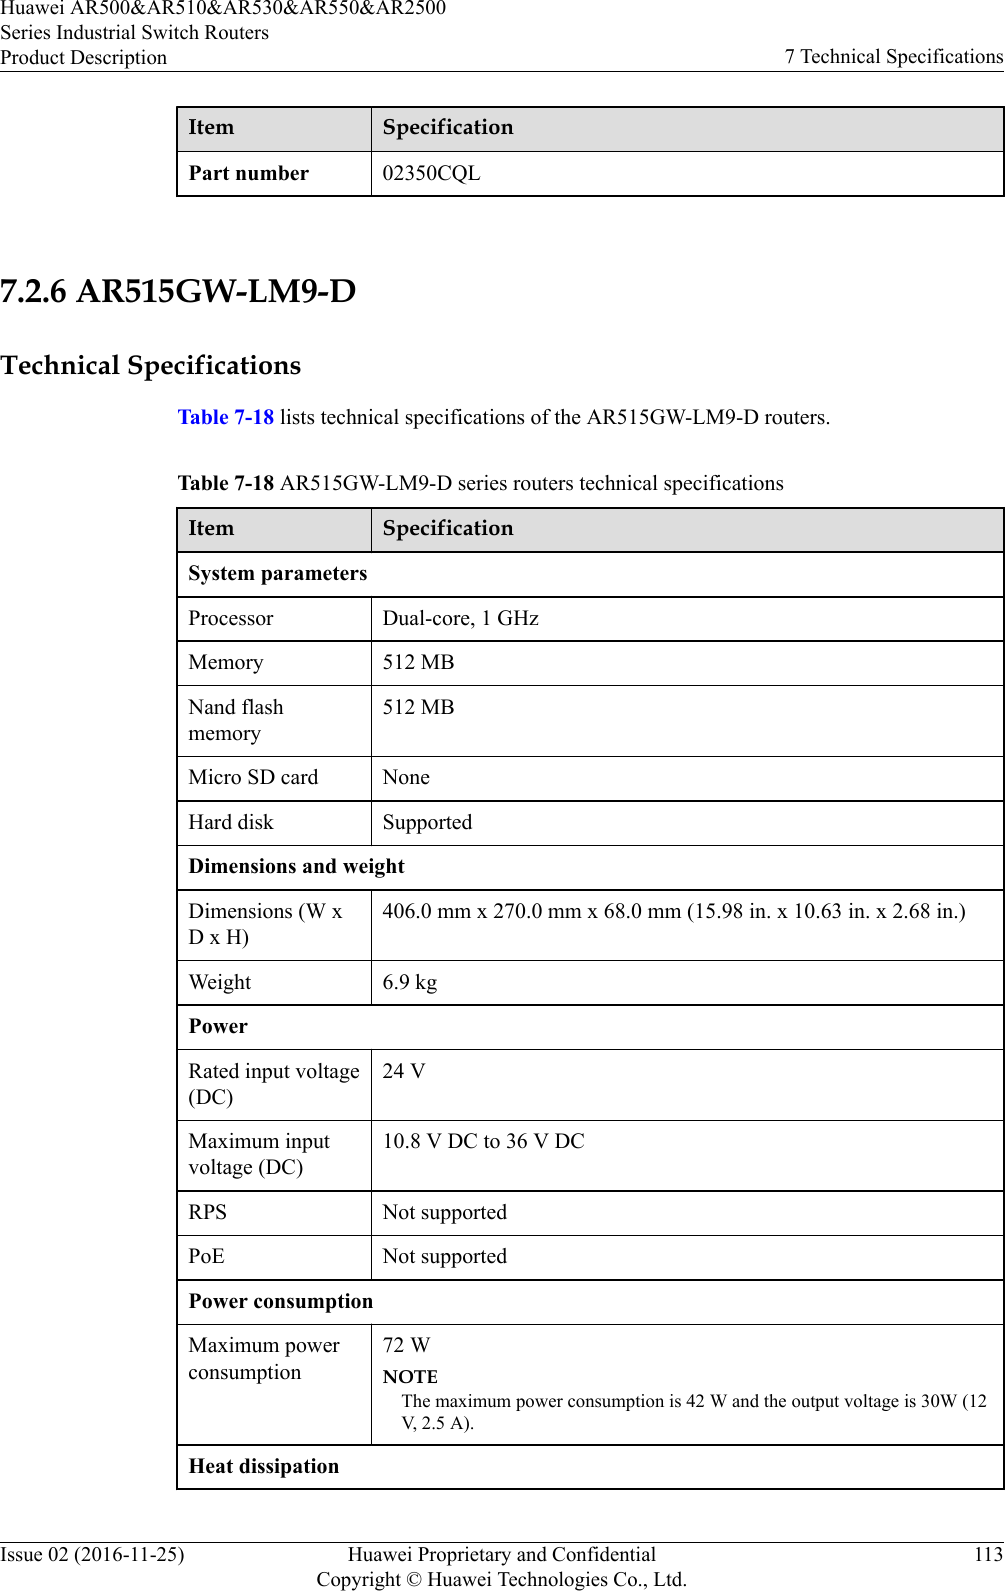 Item SpecificationPart number 02350CQL 7.2.6 AR515GW-LM9-DTechnical SpecificationsTable 7-18 lists technical specifications of the AR515GW-LM9-D routers.Table 7-18 AR515GW-LM9-D series routers technical specificationsItem SpecificationSystem parametersProcessor Dual-core, 1 GHzMemory 512 MBNand flashmemory512 MBMicro SD card NoneHard disk SupportedDimensions and weightDimensions (W xD x H)406.0 mm x 270.0 mm x 68.0 mm (15.98 in. x 10.63 in. x 2.68 in.)Weight 6.9 kgPowerRated input voltage(DC)24 VMaximum inputvoltage (DC)10.8 V DC to 36 V DCRPS Not supportedPoE Not supportedPower consumptionMaximum powerconsumption72 WNOTEThe maximum power consumption is 42 W and the output voltage is 30W (12V, 2.5 A).Heat dissipationHuawei AR500&amp;AR510&amp;AR530&amp;AR550&amp;AR2500Series Industrial Switch RoutersProduct Description 7 Technical SpecificationsIssue 02 (2016-11-25) Huawei Proprietary and ConfidentialCopyright © Huawei Technologies Co., Ltd.113